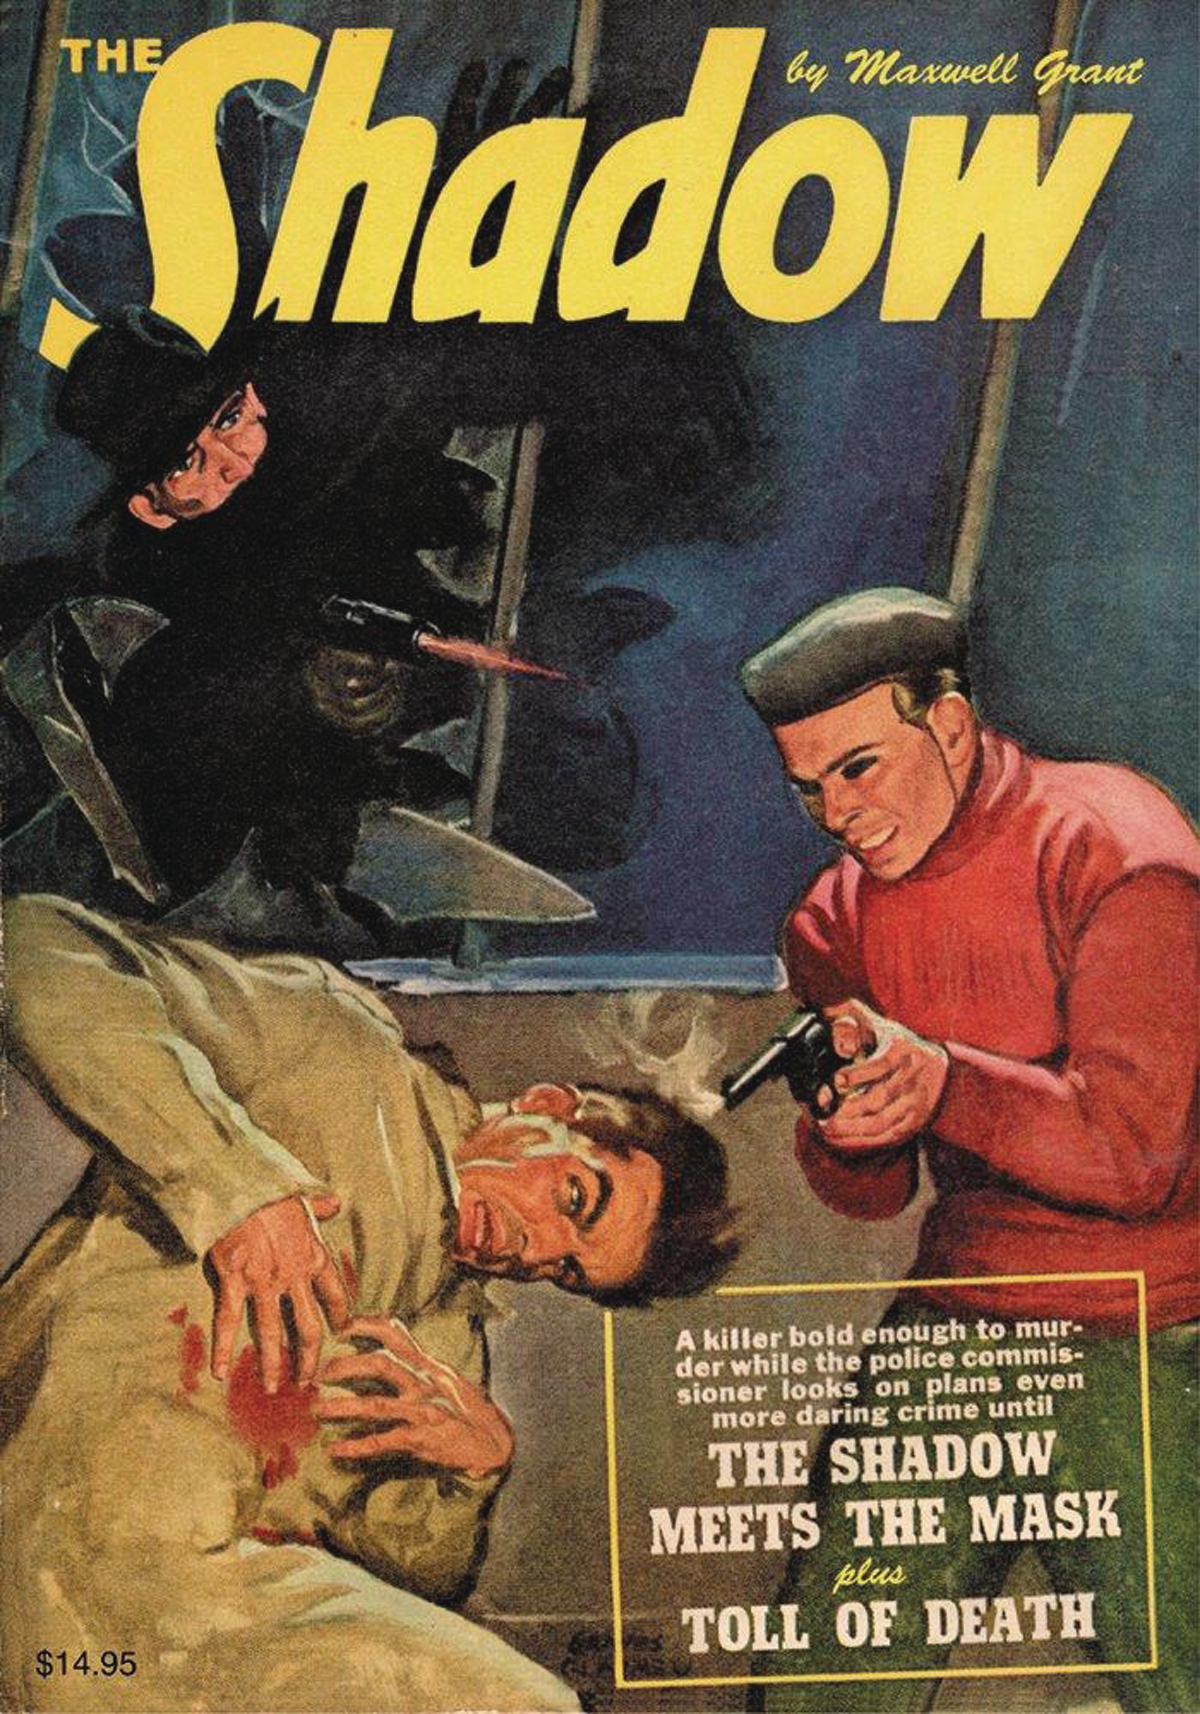 SHADOW DOUBLE NOVEL VOL 143 SHADOW MEETS MASK  TOLL OF DEATH